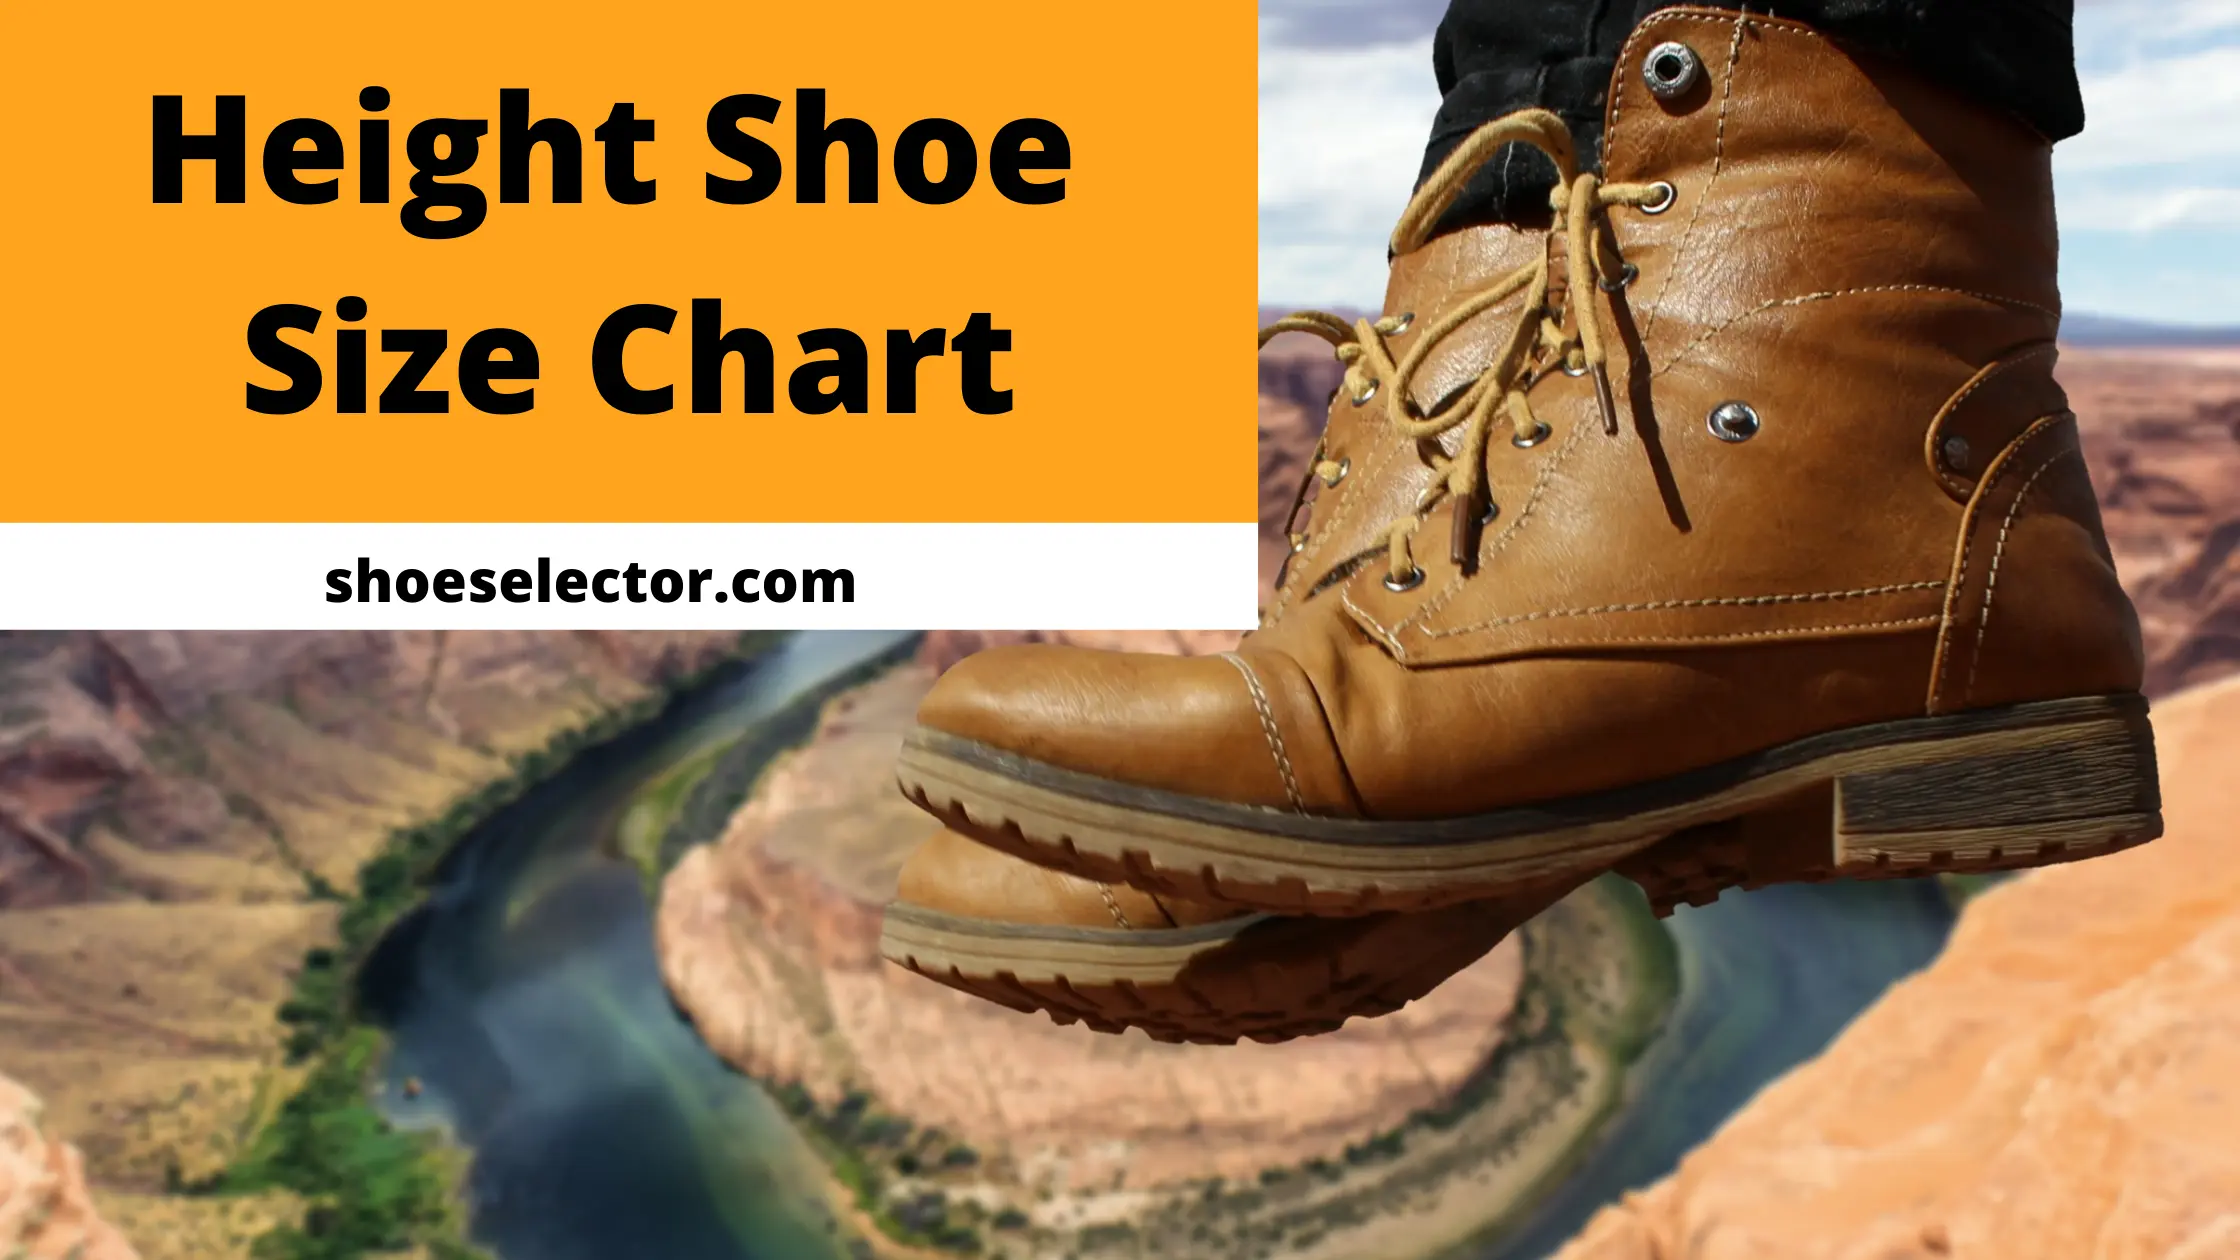 Height Shoe Size Chart by Age